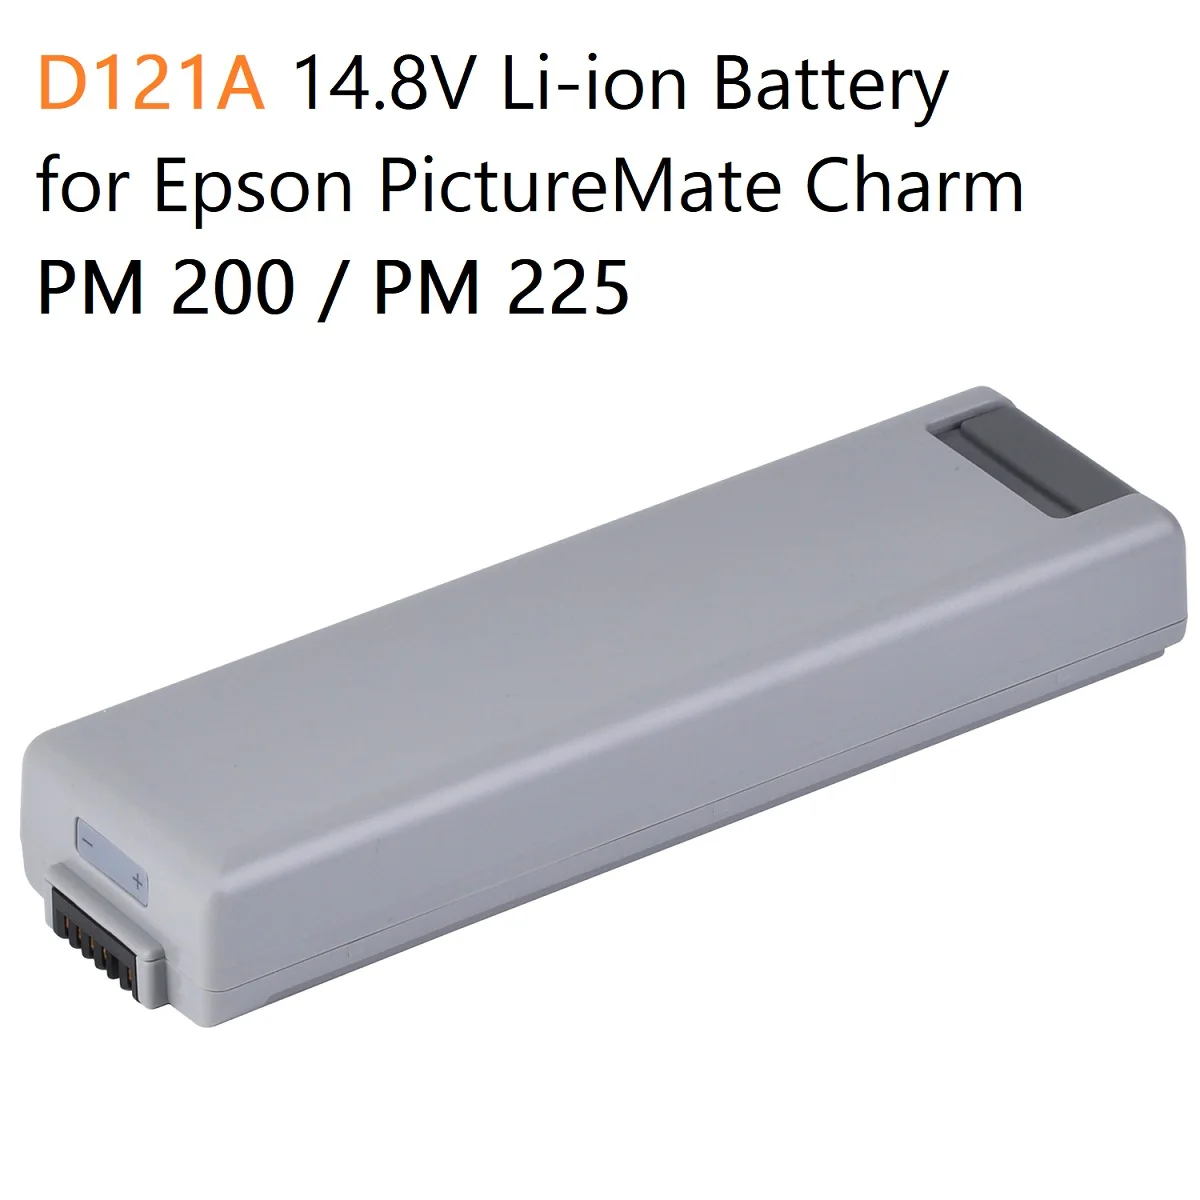 

14.8V 1450mAh D121A Li-ion Battery Replacement for Epson PictureMate Charm PM 200 Printer Charm PM 225 Accumulator